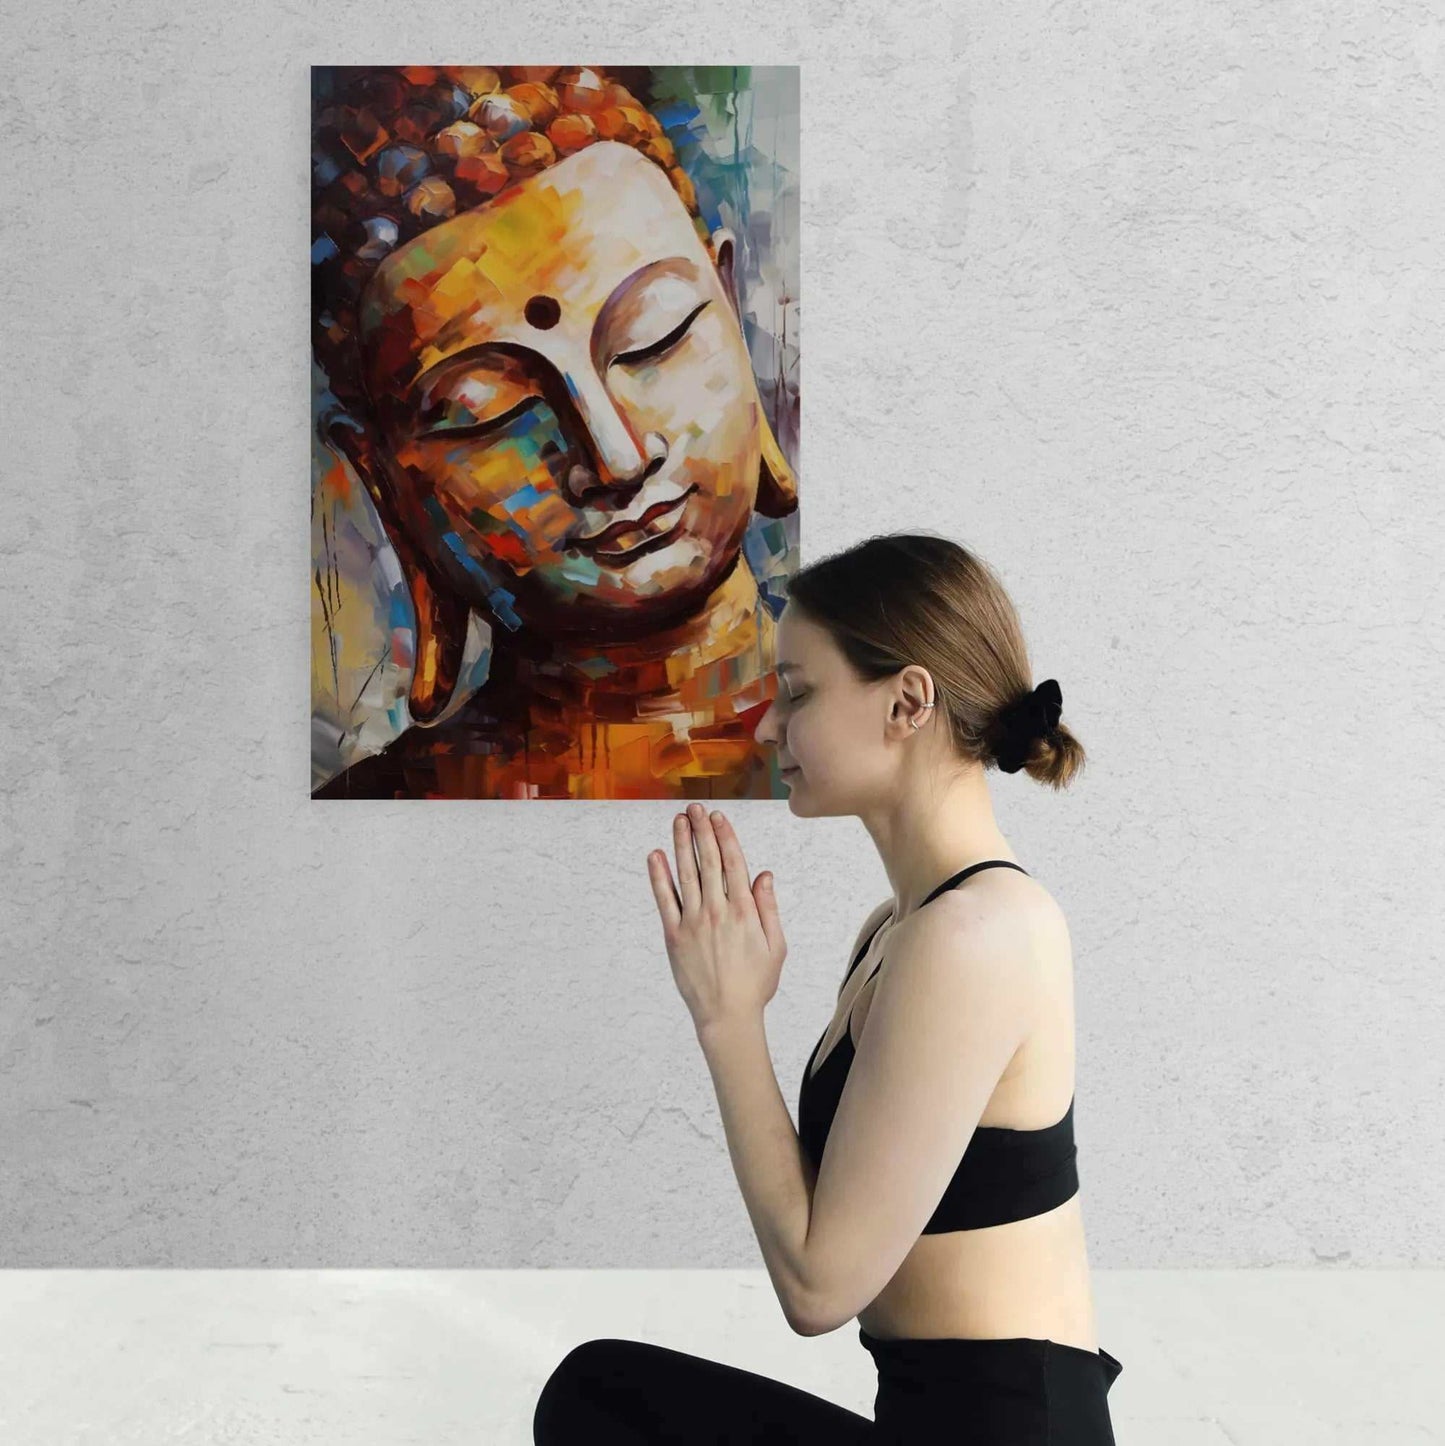 Woman in a black outfit engaging in peaceful meditation in front of an abstract, colorful Buddha portrait, symbolizing inner calm and spirituality.